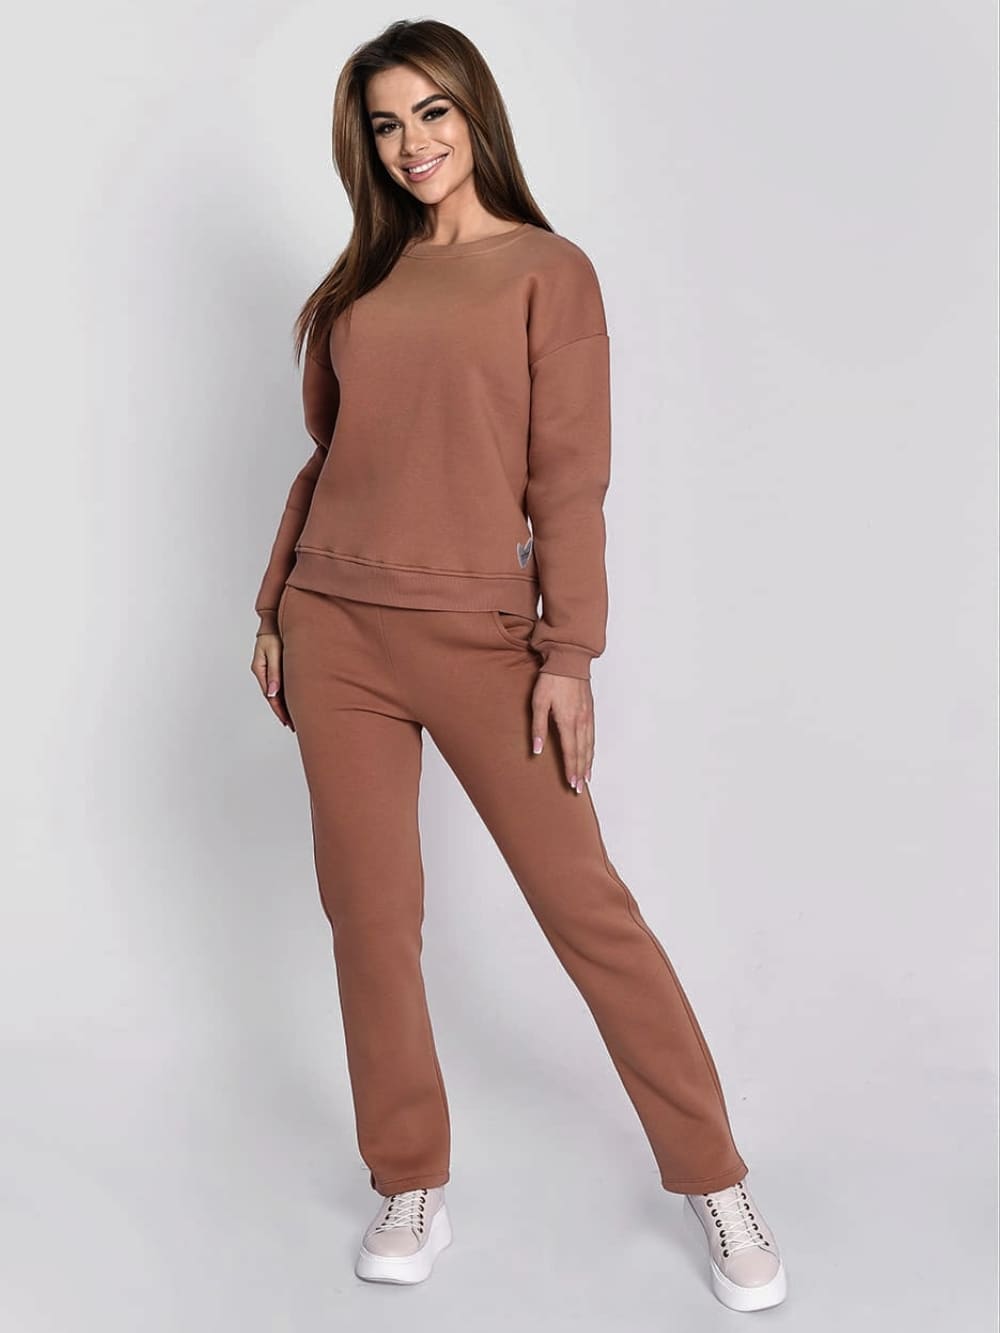 Women's Insulated Tracksuit, Beige Sweatshirt And Loose Trousers